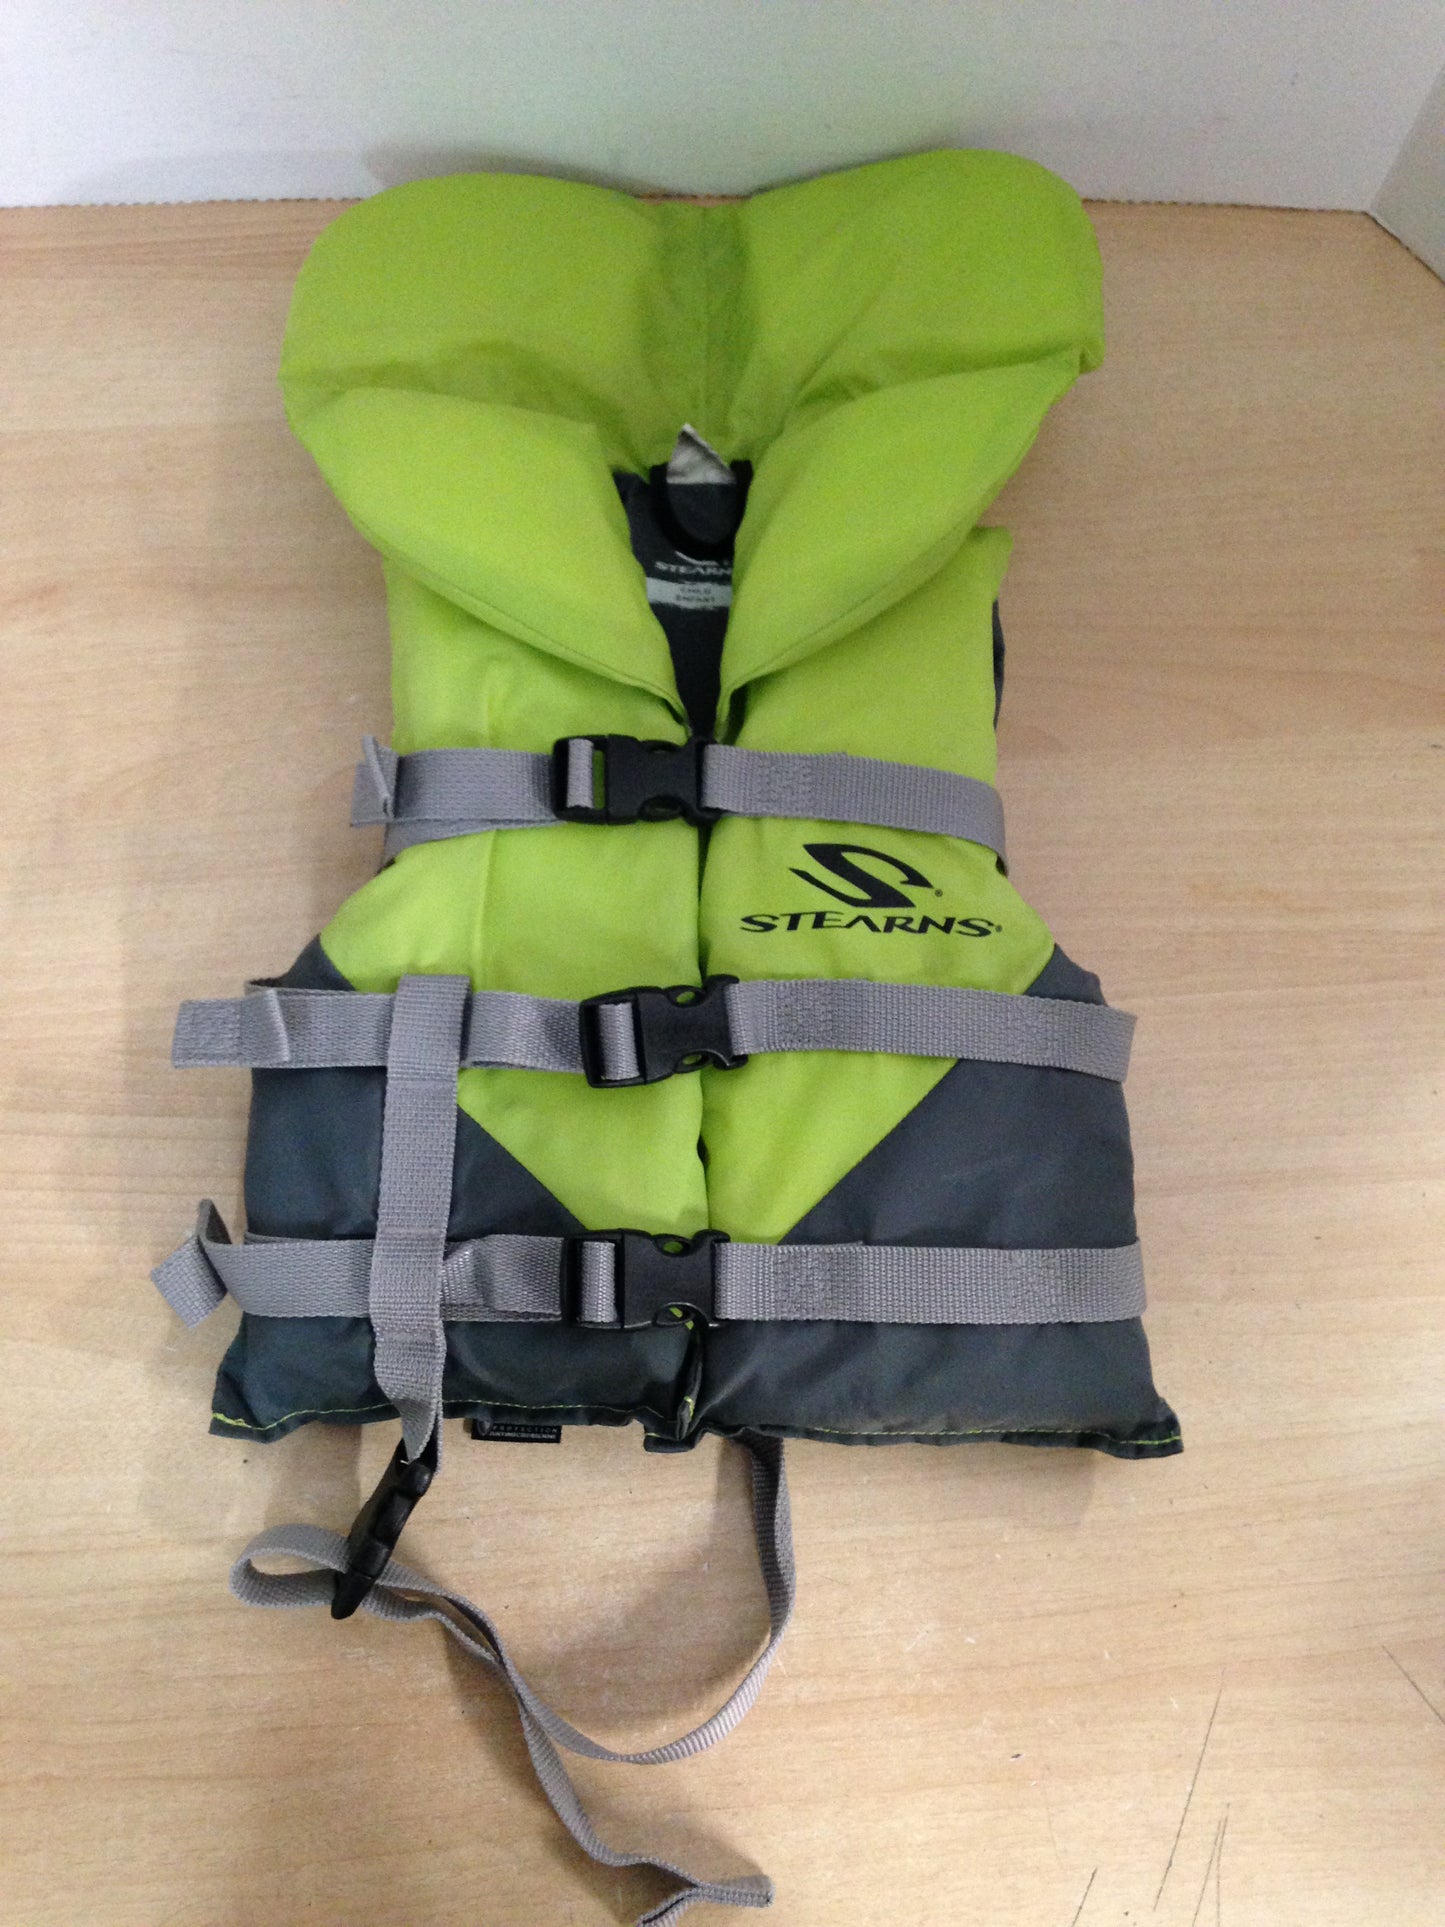 Life Jacket Child Size 30-60 Lb Stearns Apple Green Excellent